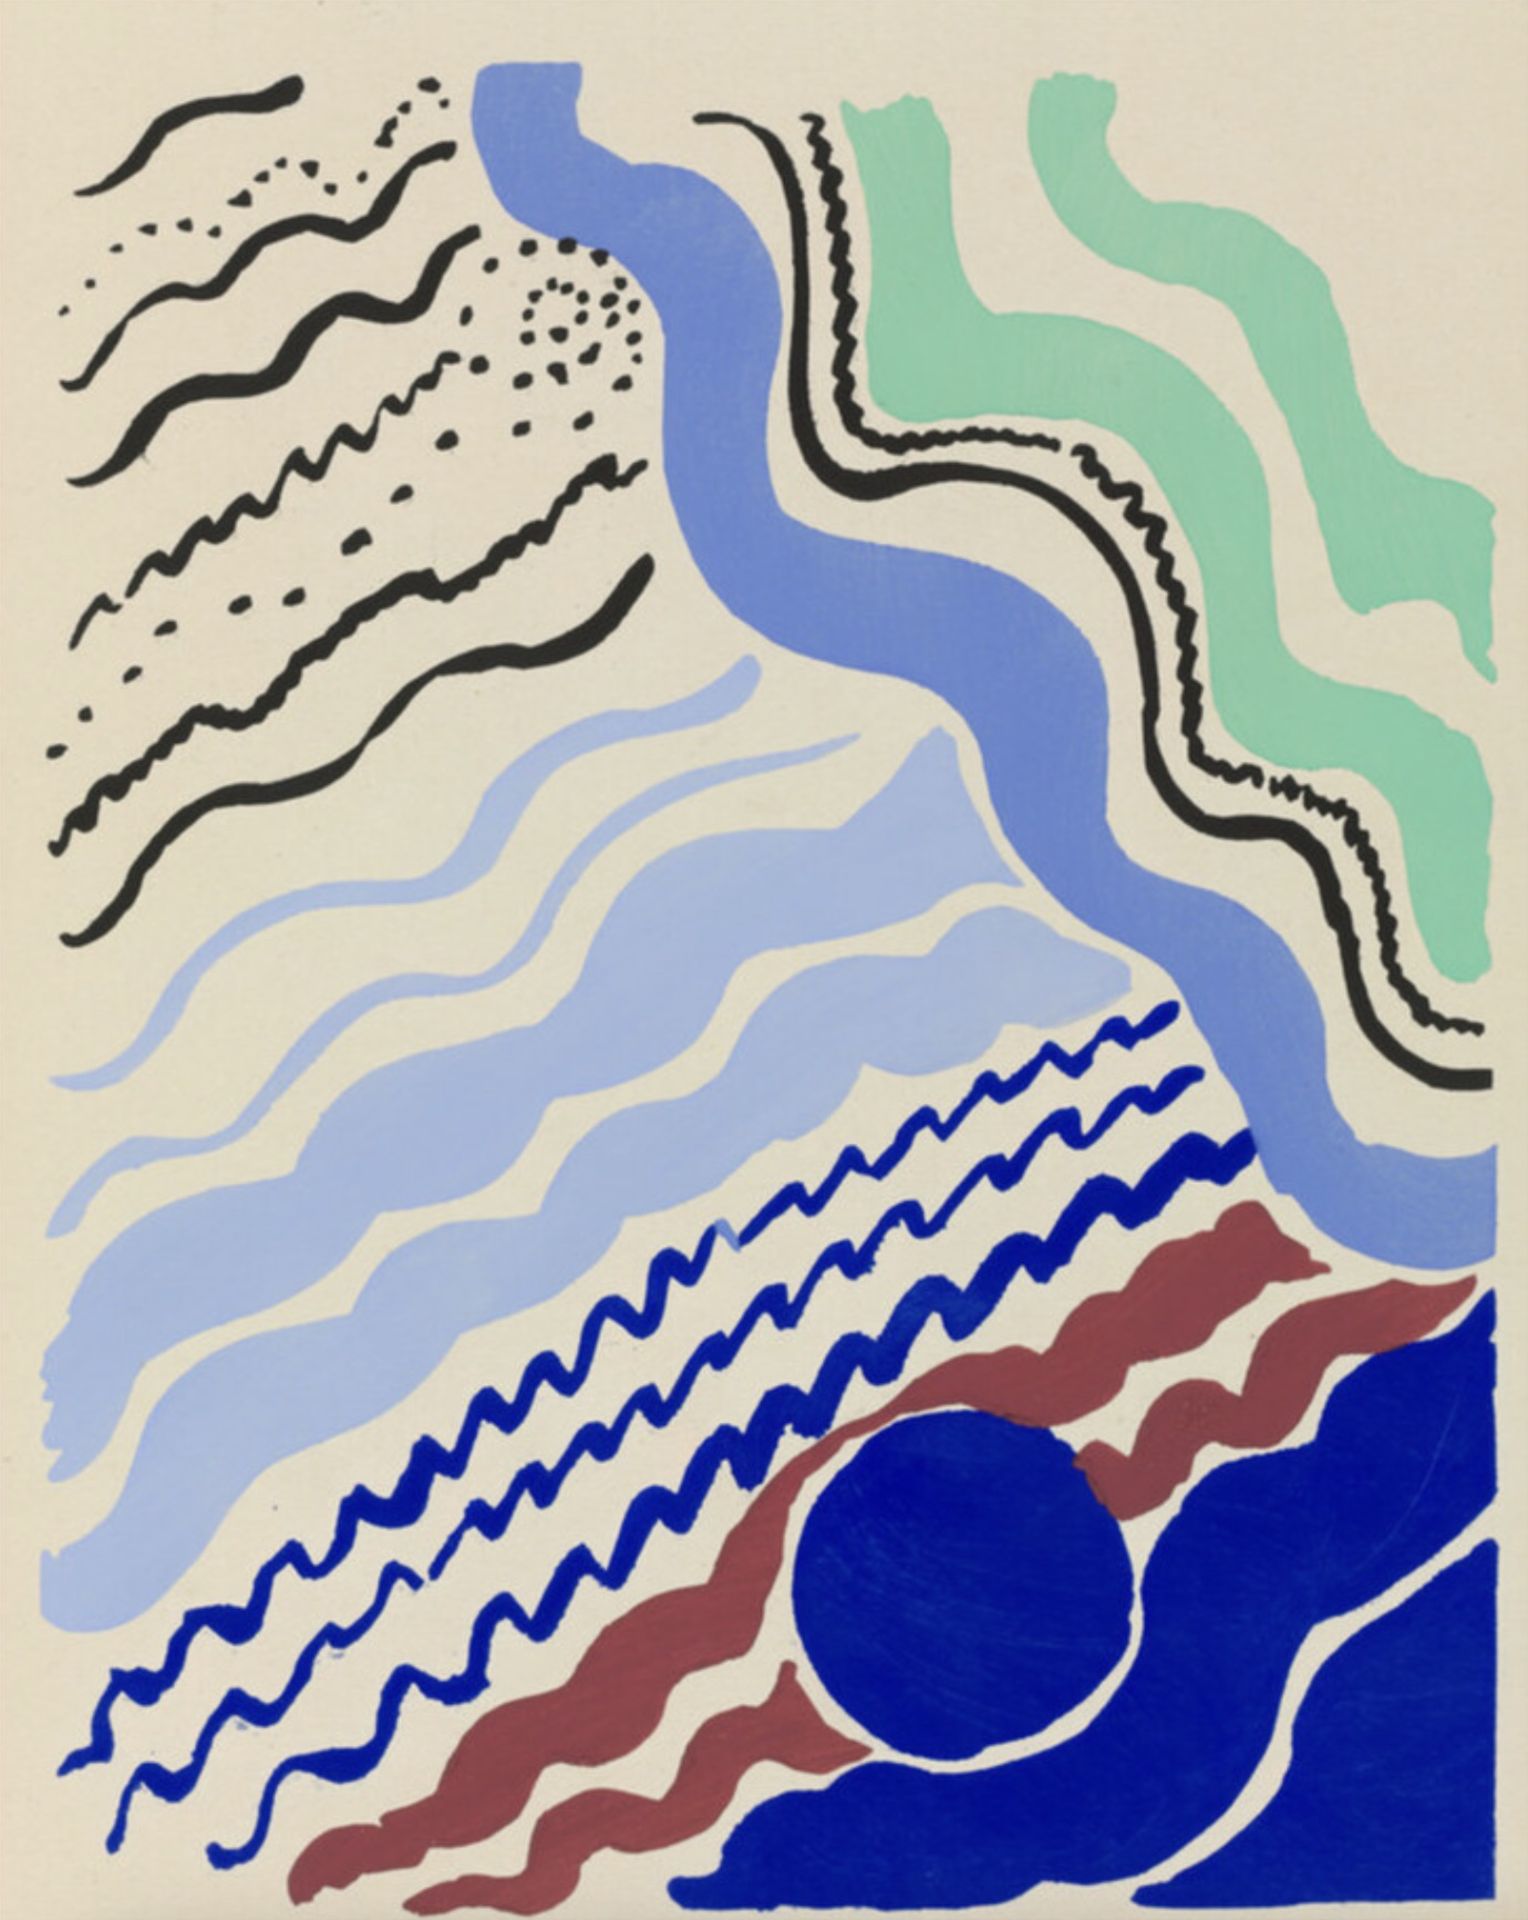 Sonia Delaunay "Untitled, 1930" Offset Lithograph